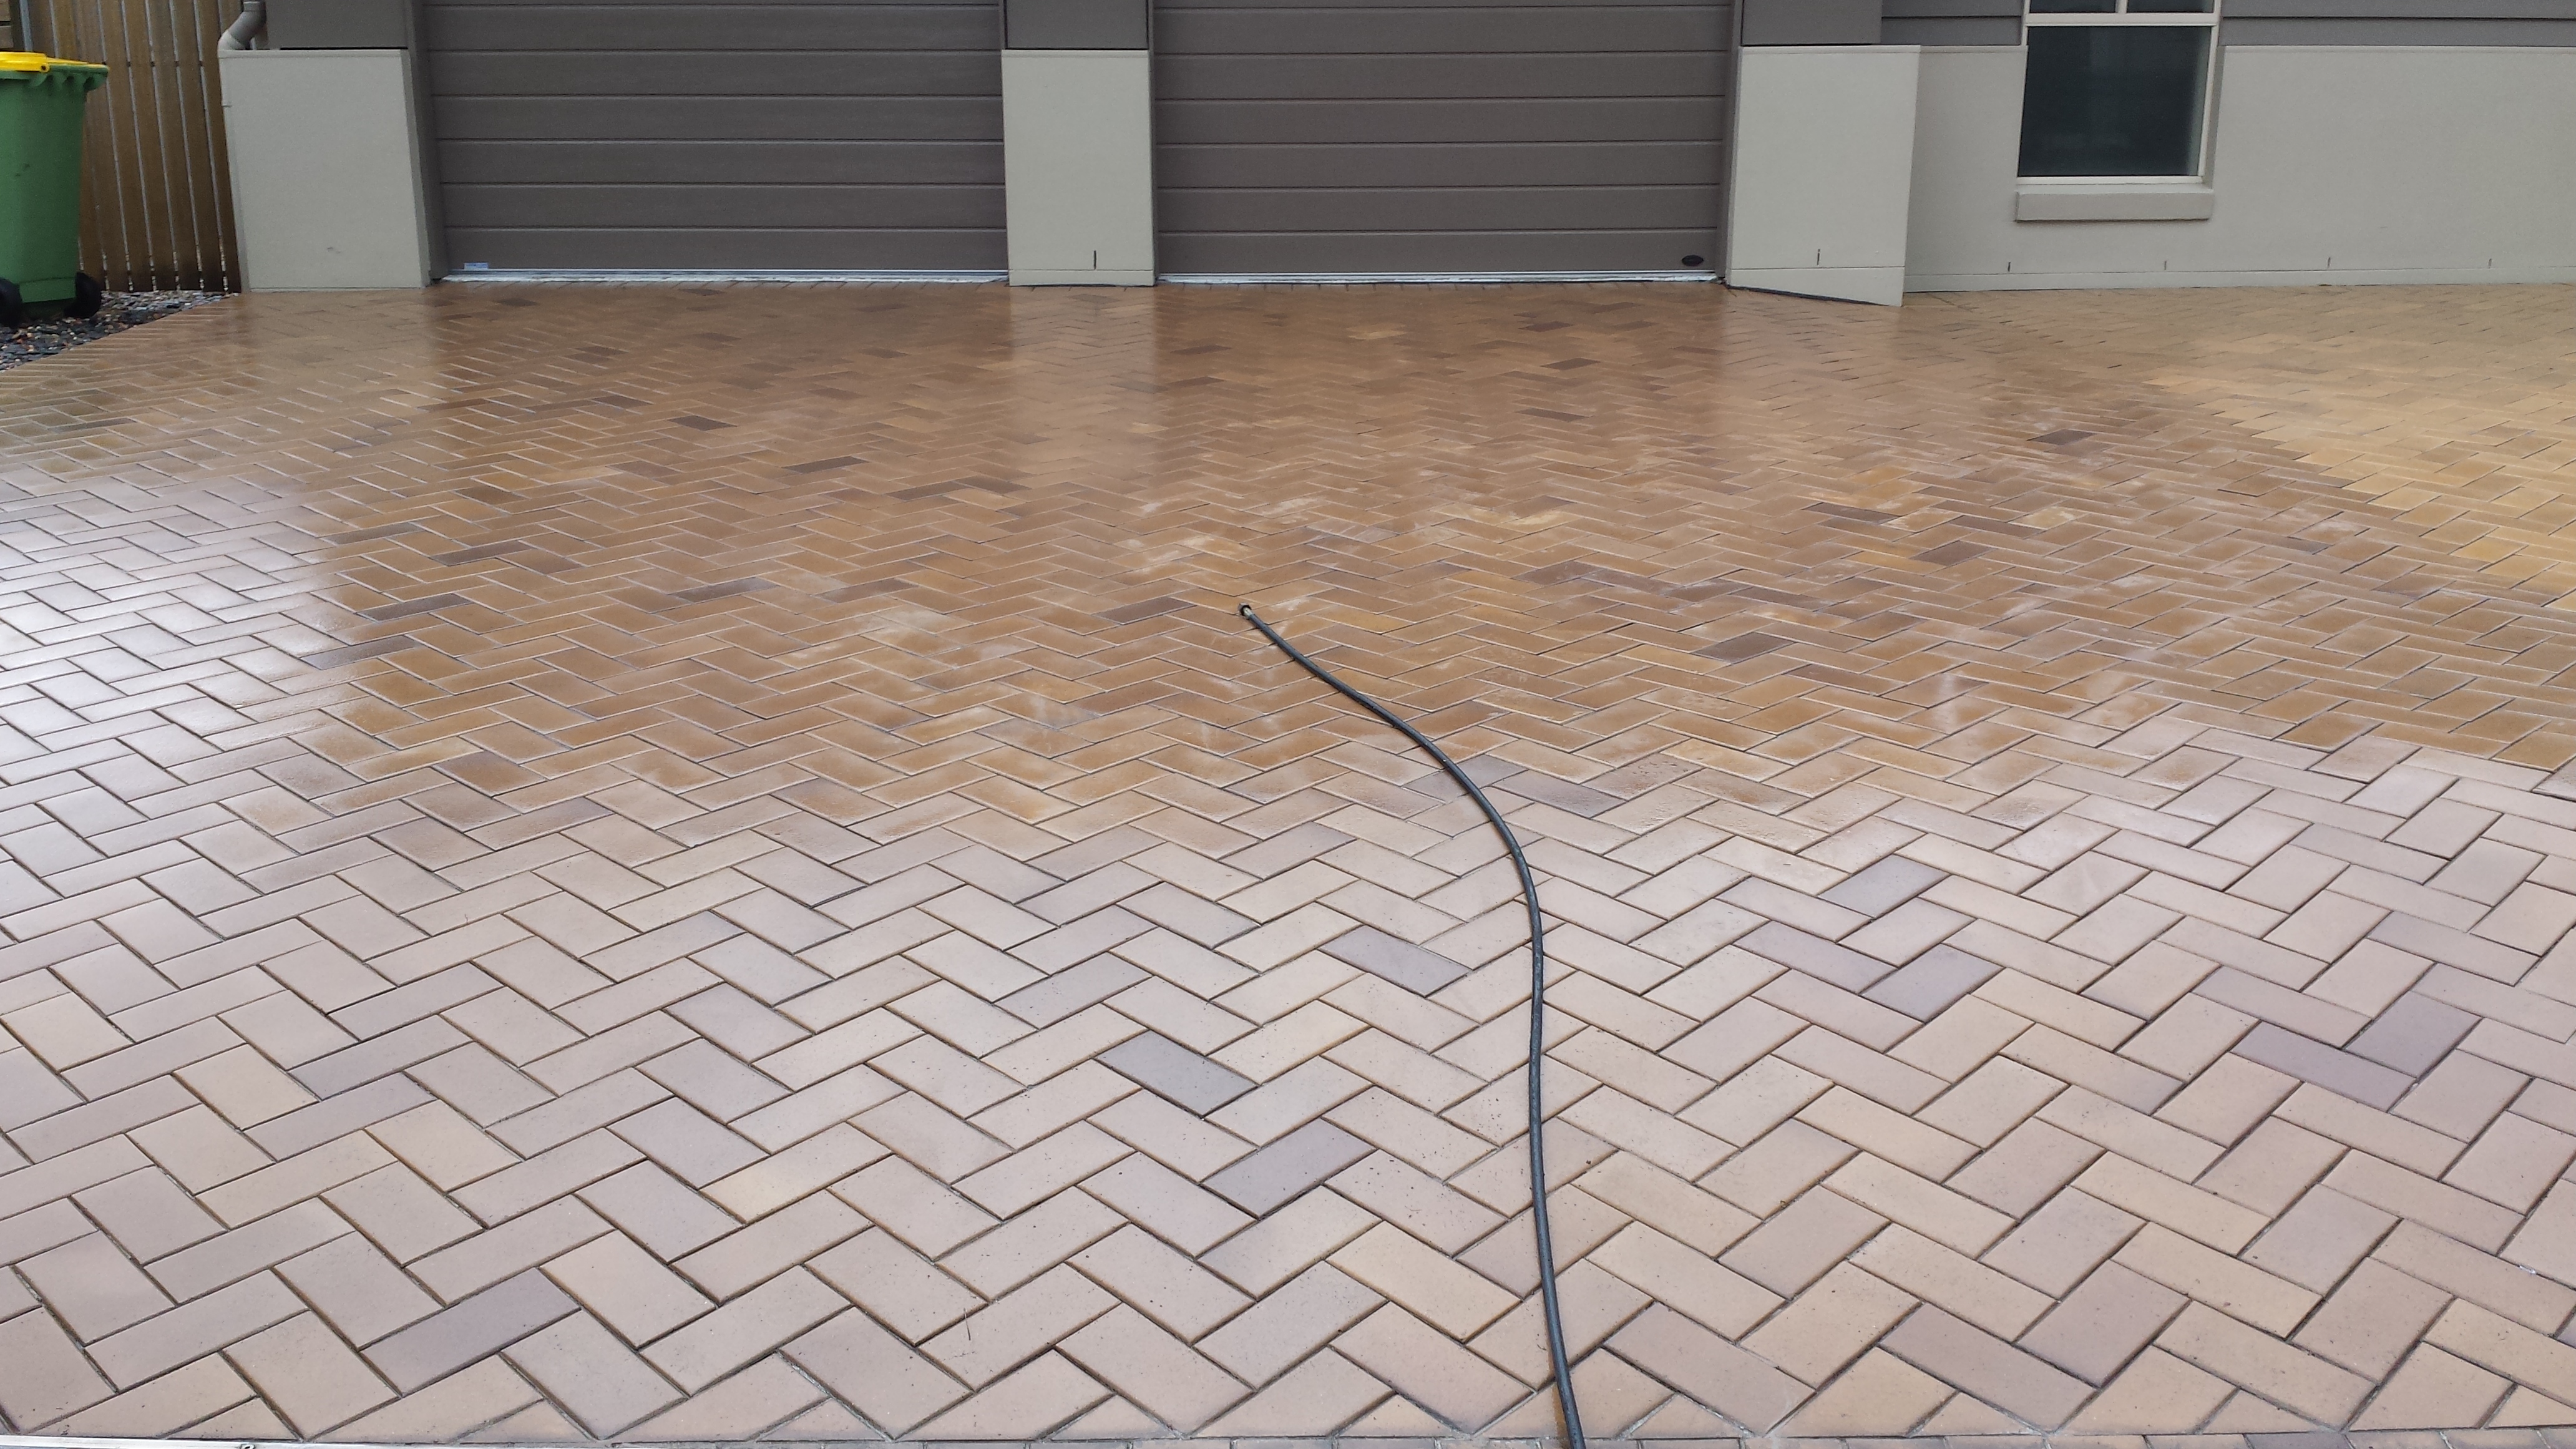 Driveway cleaning services Queensland